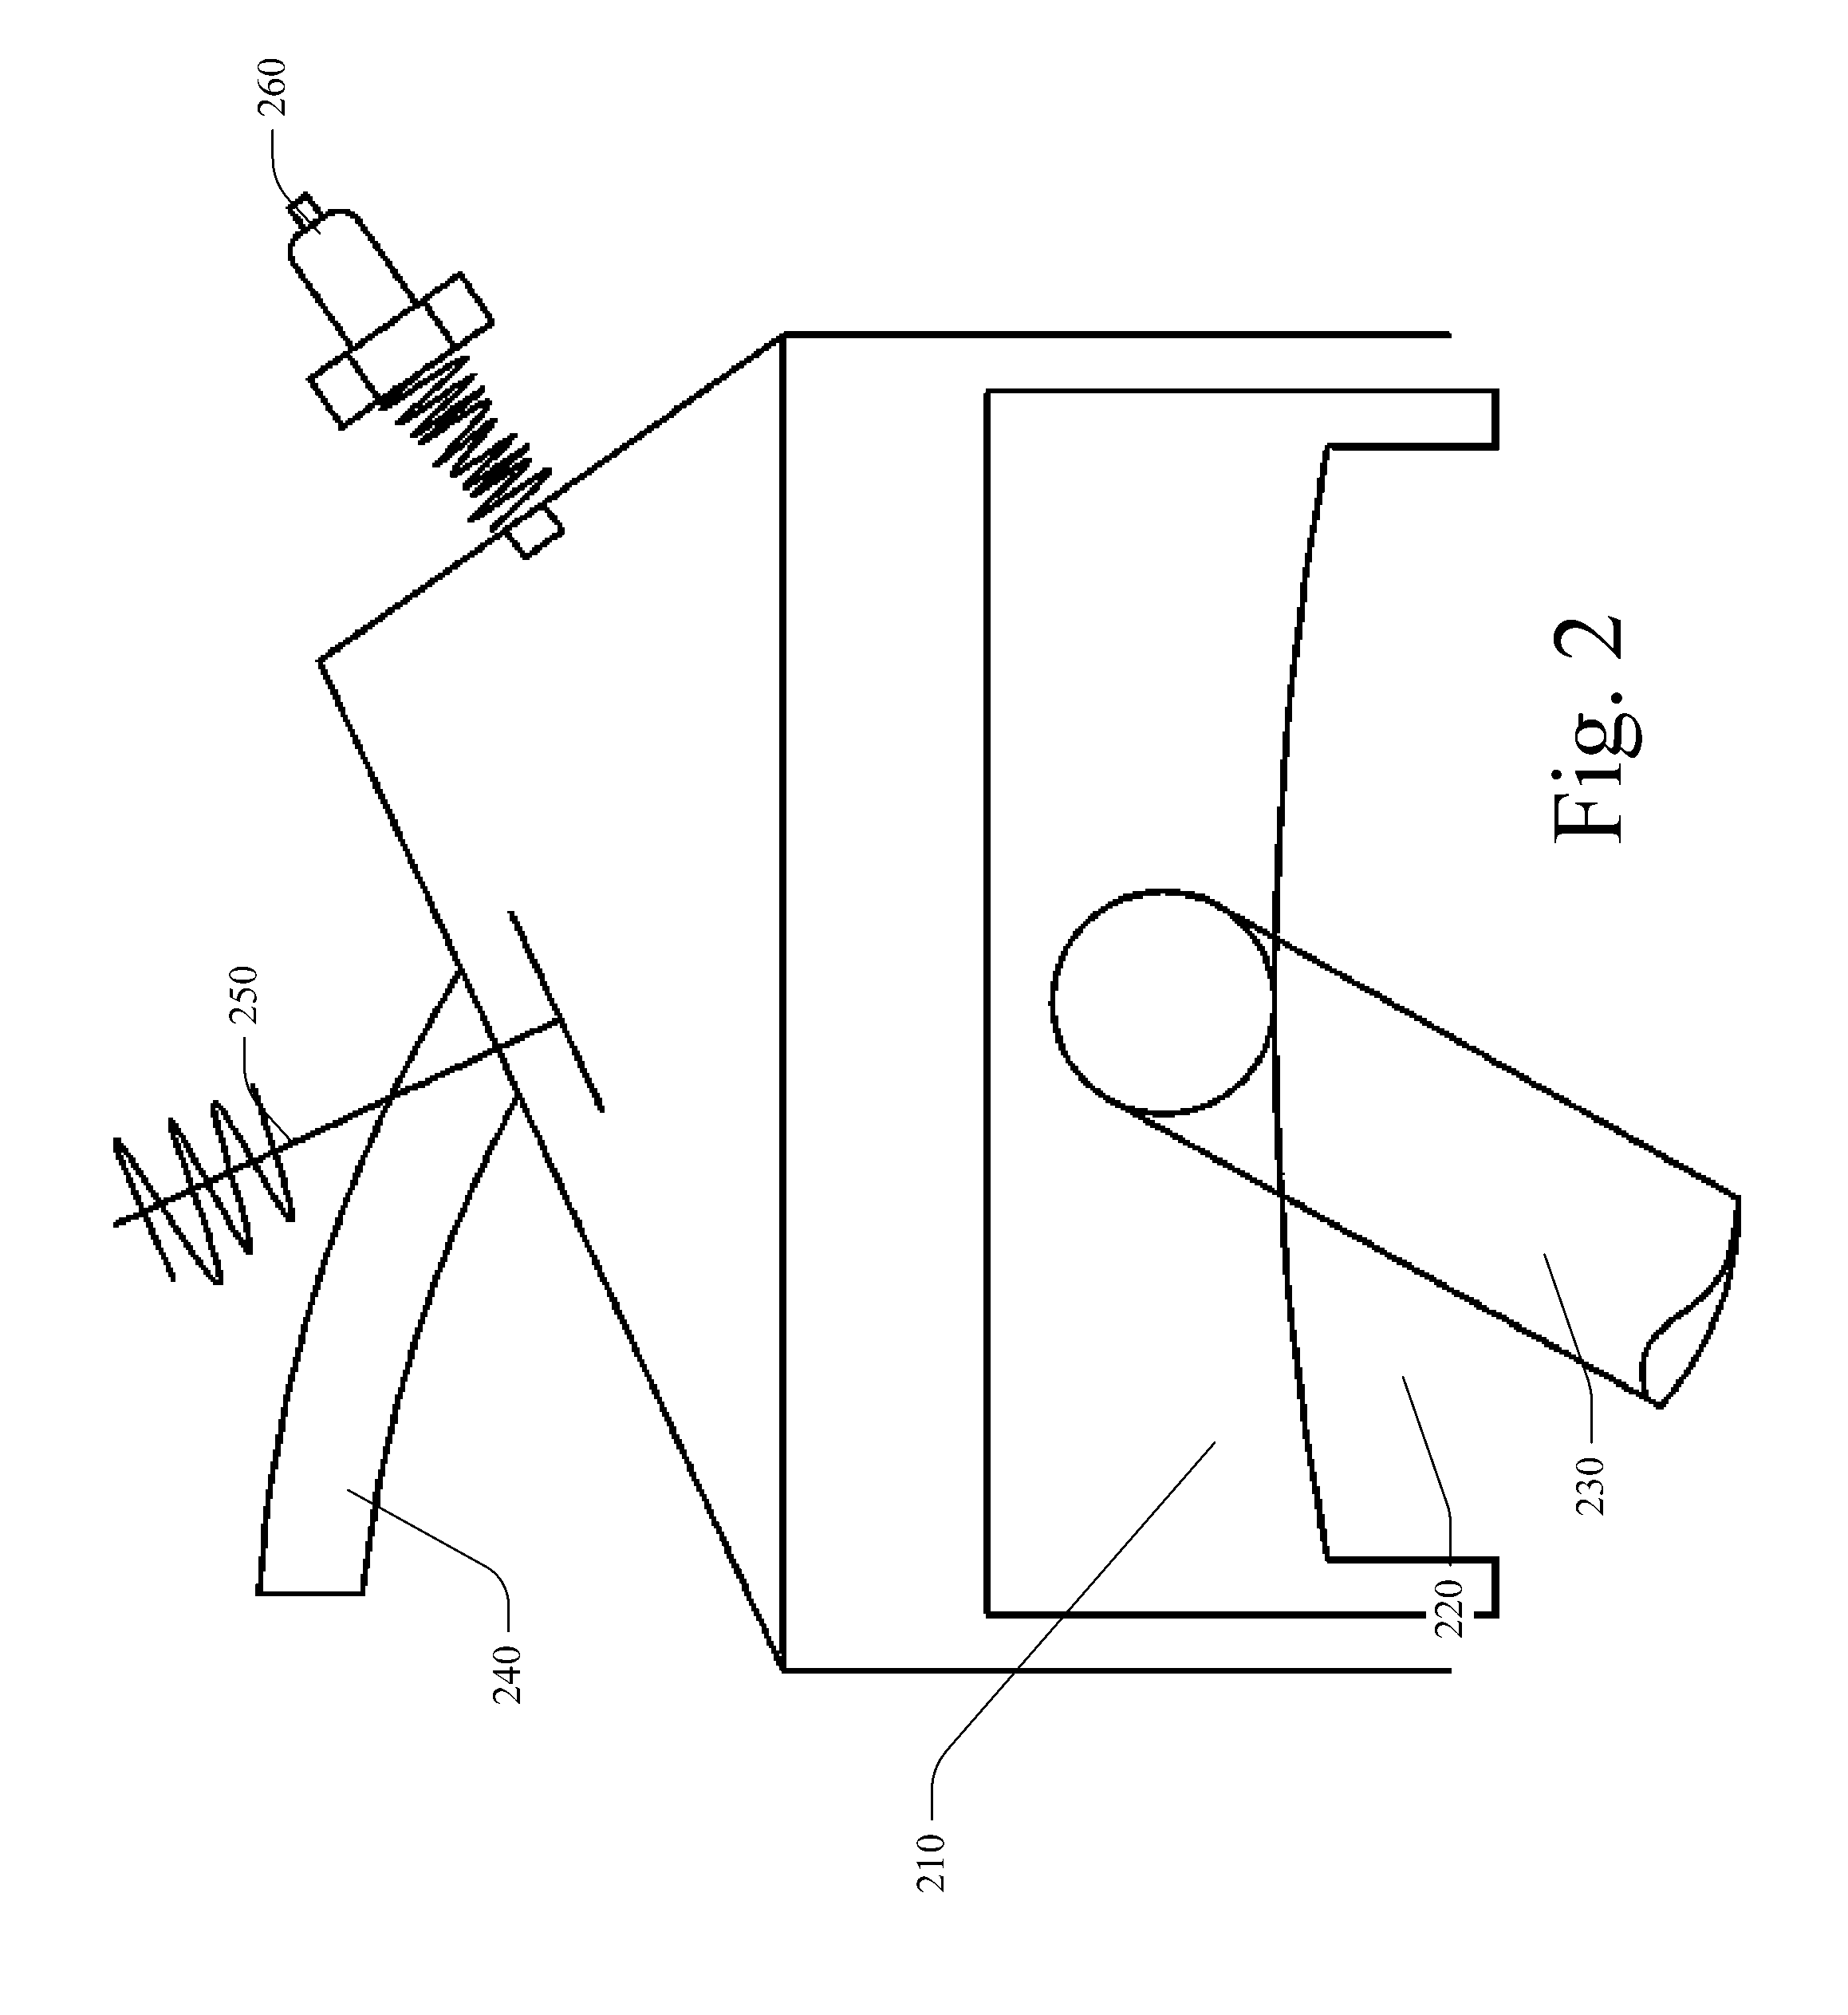 Internal combustion engine with modified shaft